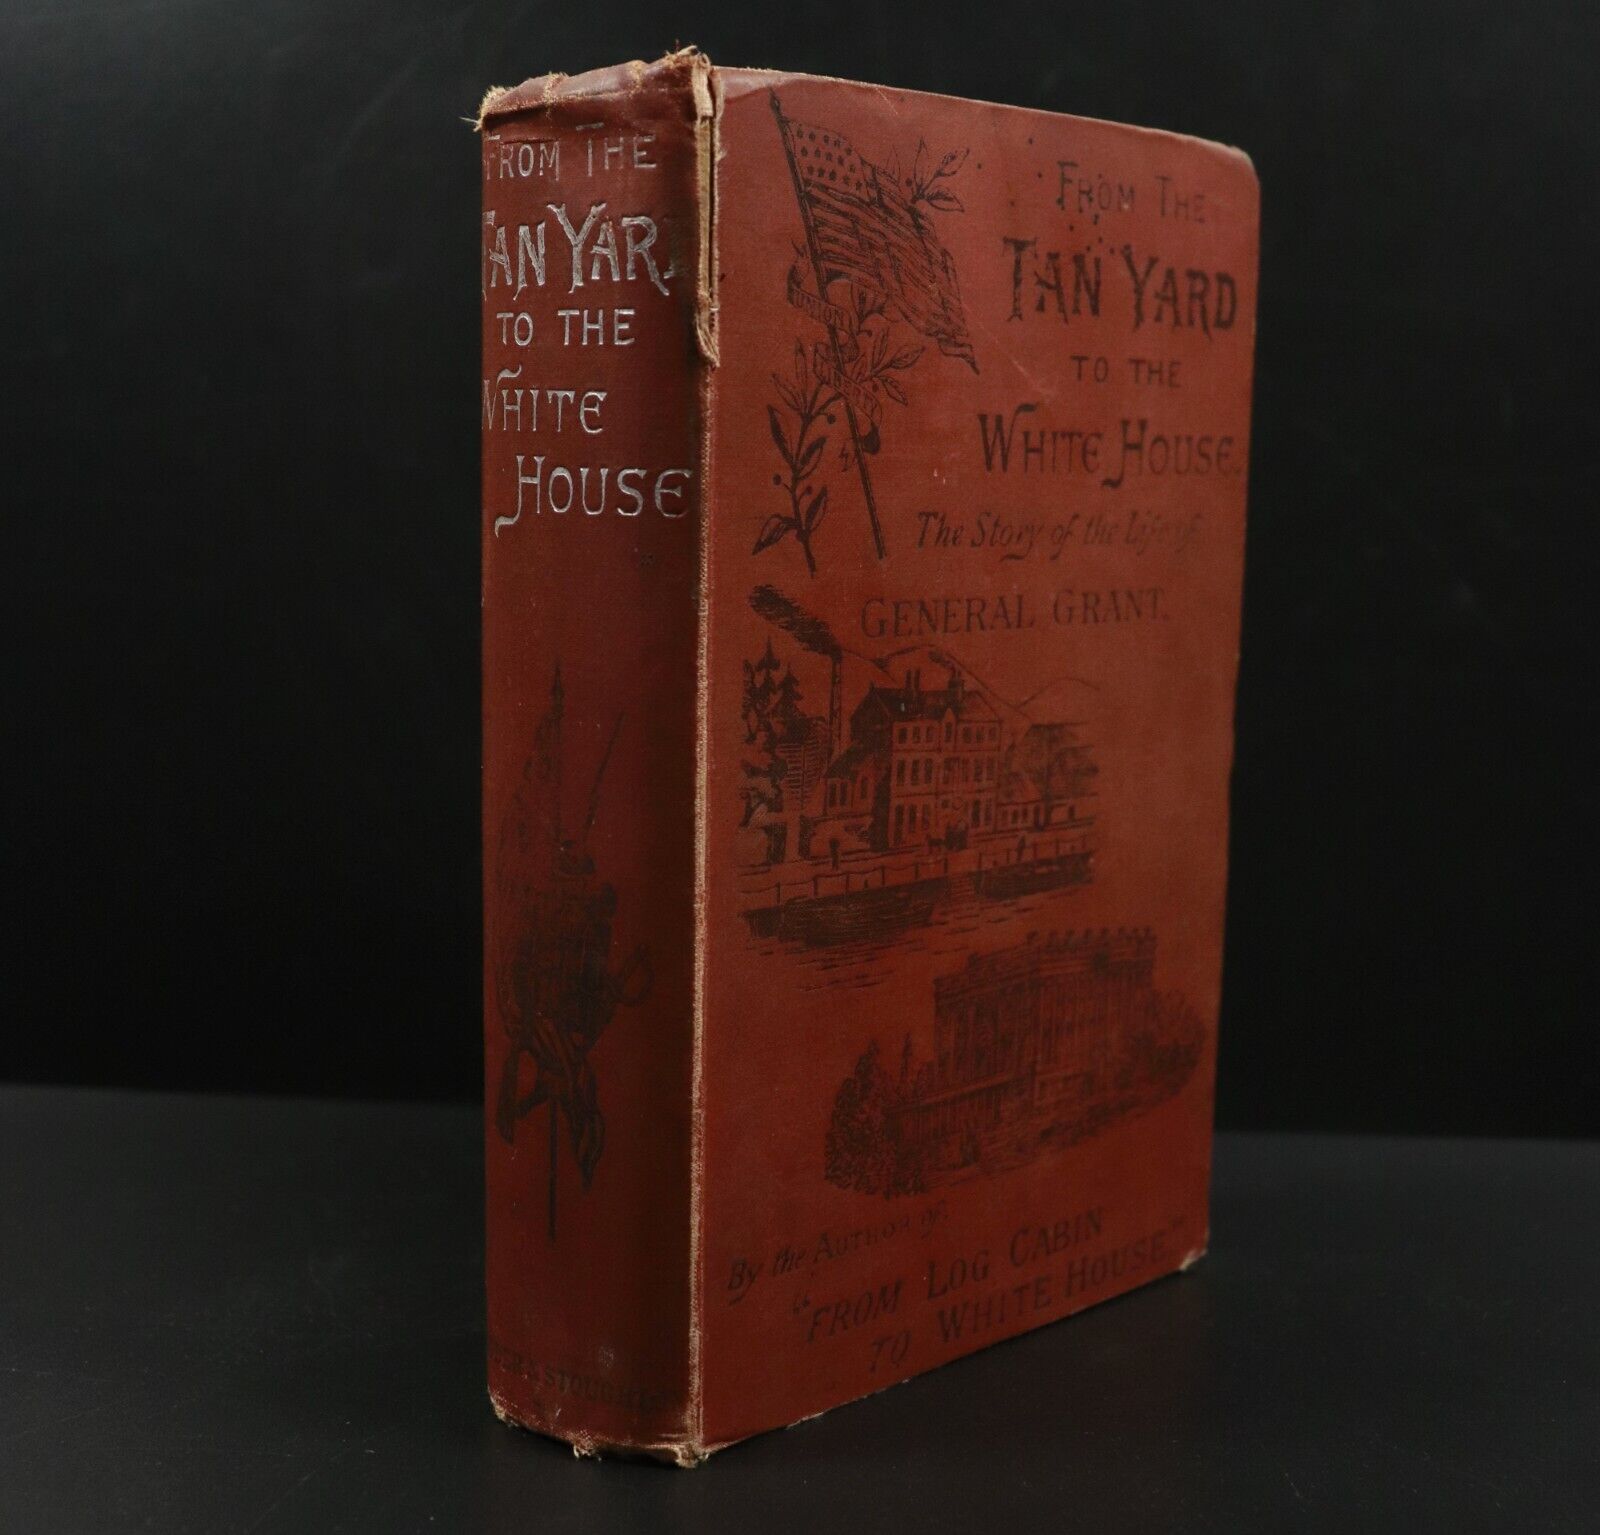 1886 From The Tan Yard To The White House Antique American History Book W Thayer